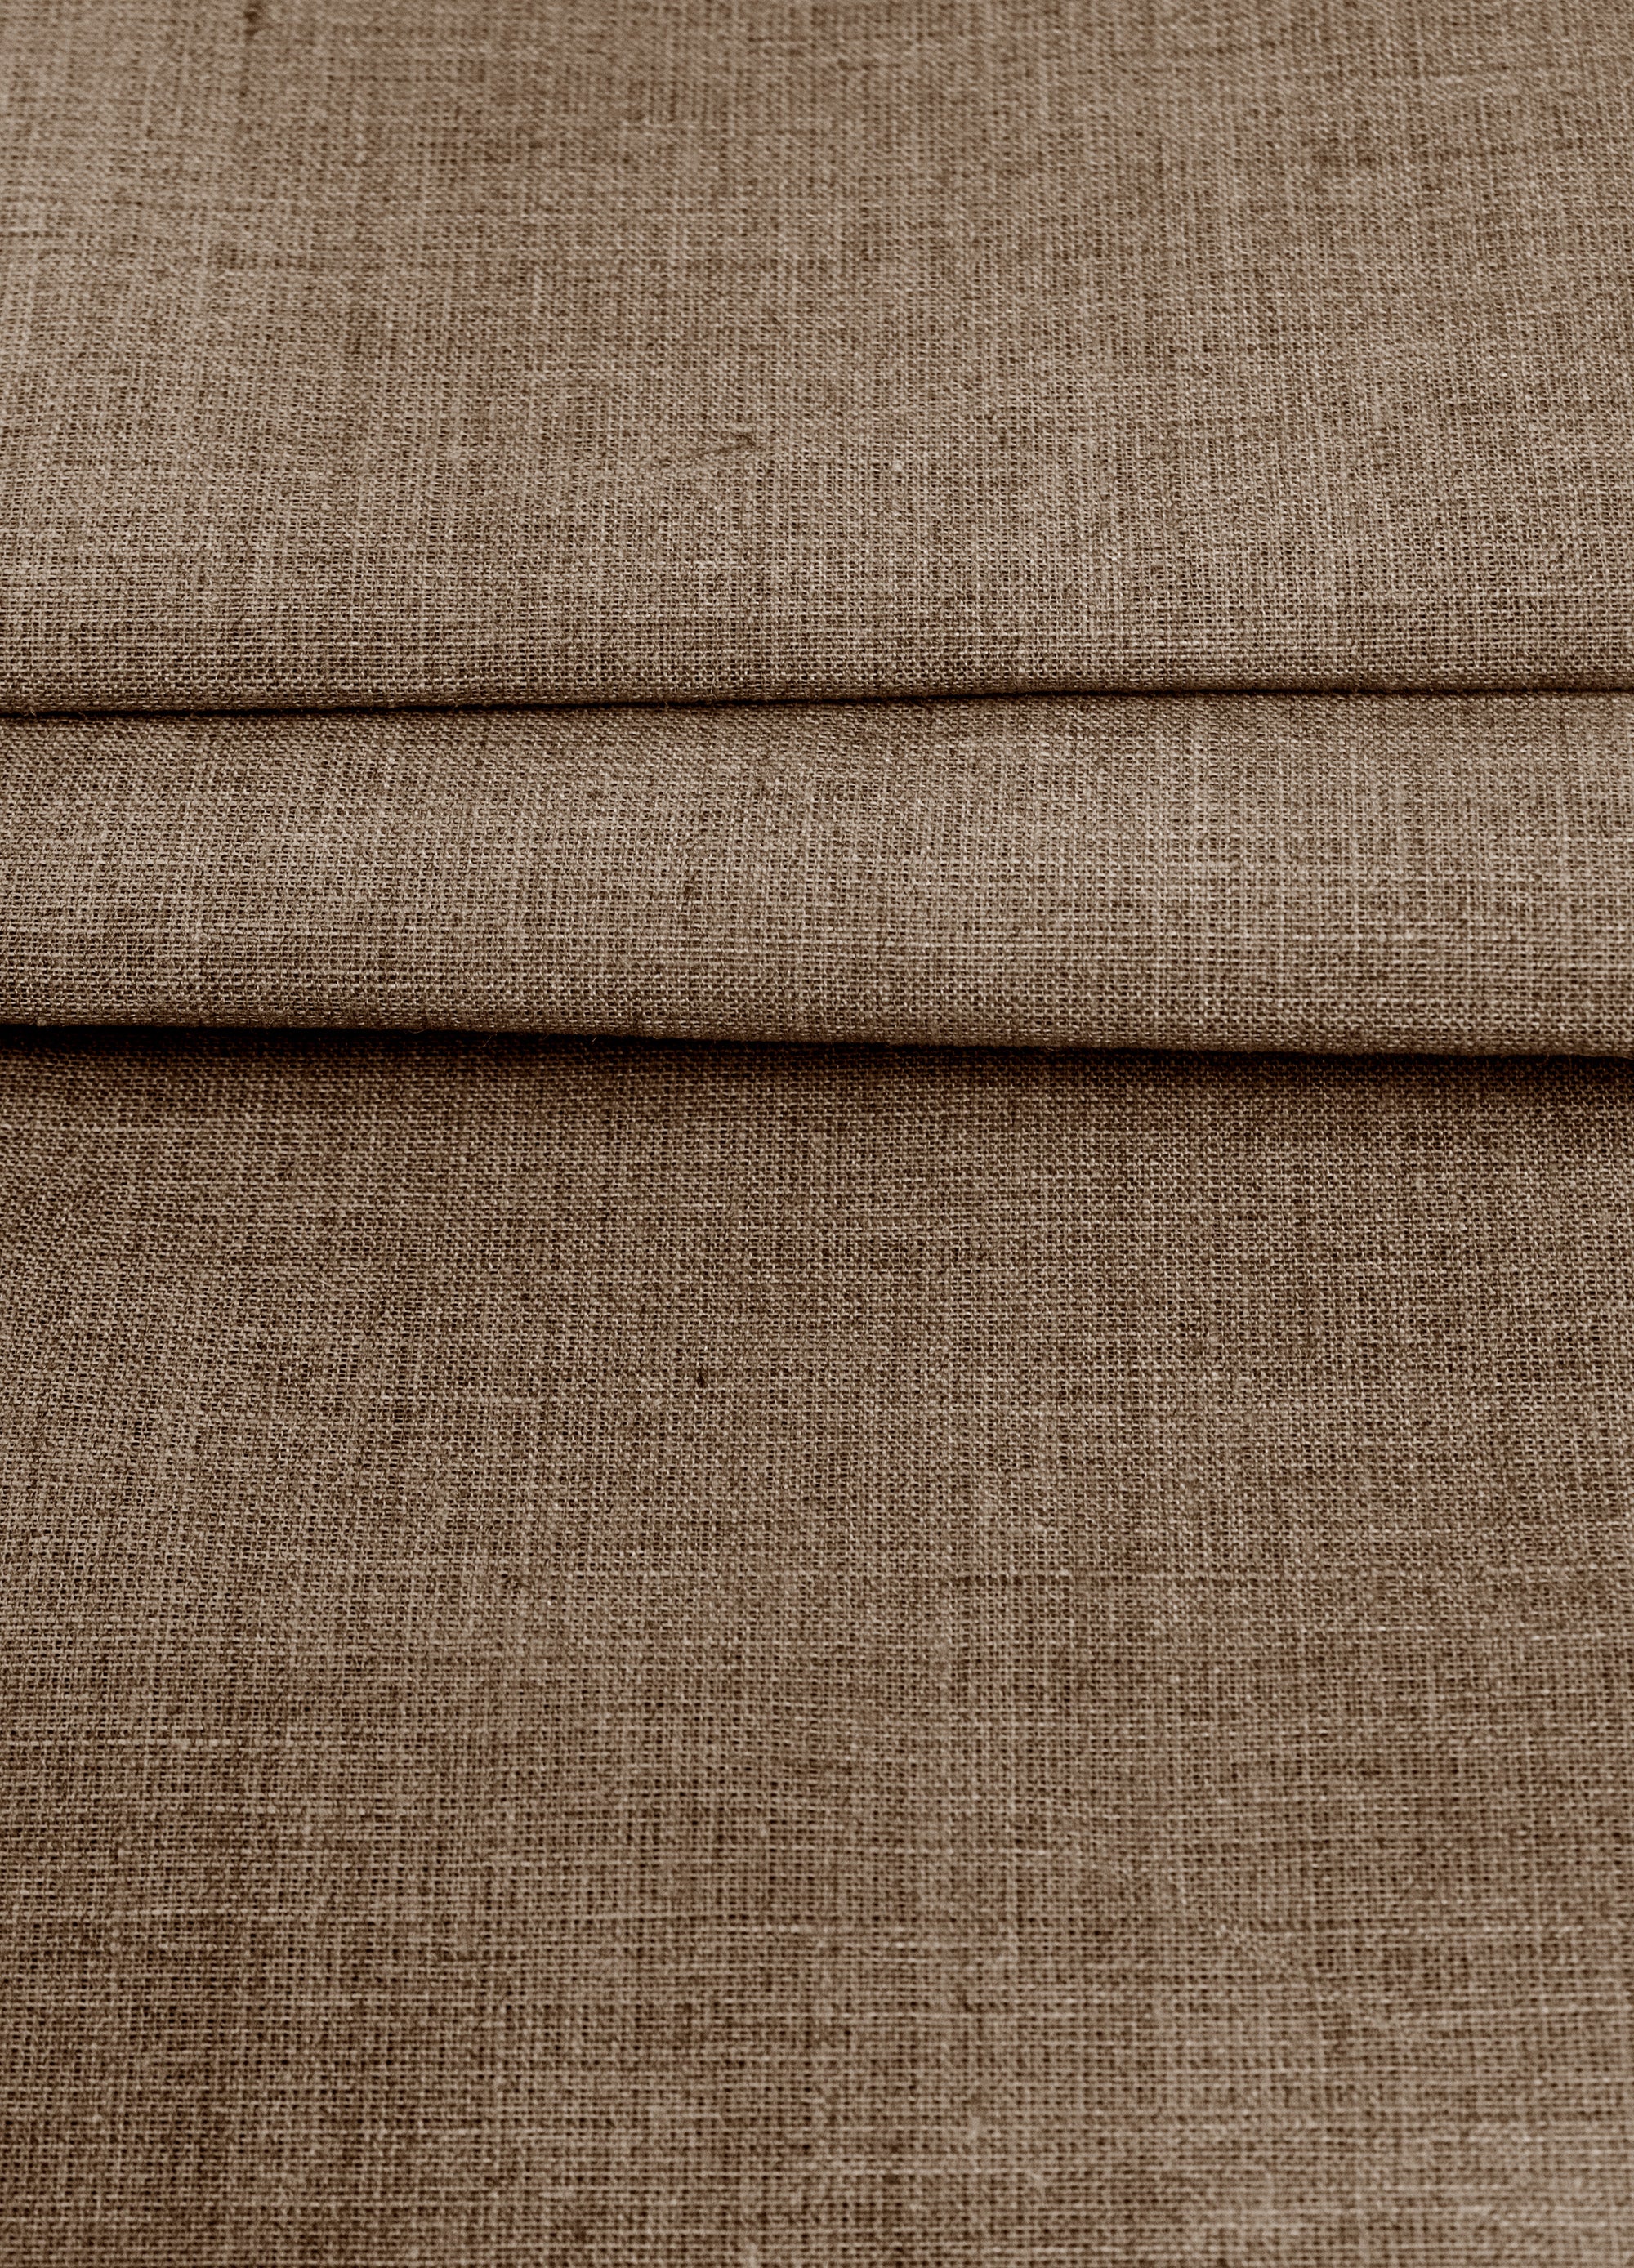 Luca-S Natural Pure 100% Linen Severe Fabric Brown Color